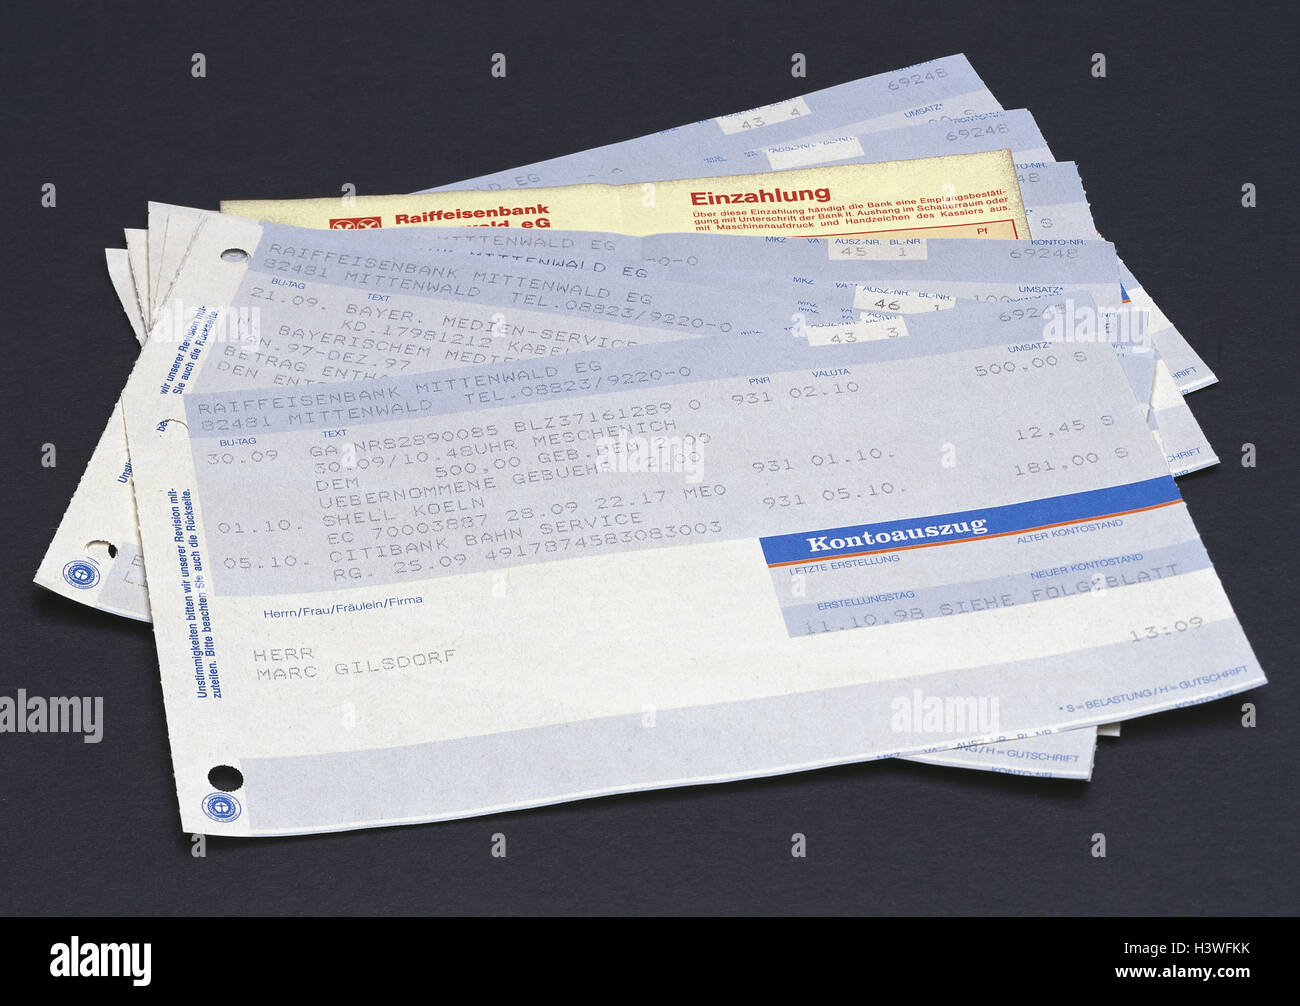 Bank statements, bank statement, bank statement, bank, banking transactions, voucher, credit balance, finances, product photography, Still life, banking secrecy, account monitoring, disclosure, obligation to information, 'of glass knowledge', Stock Photo